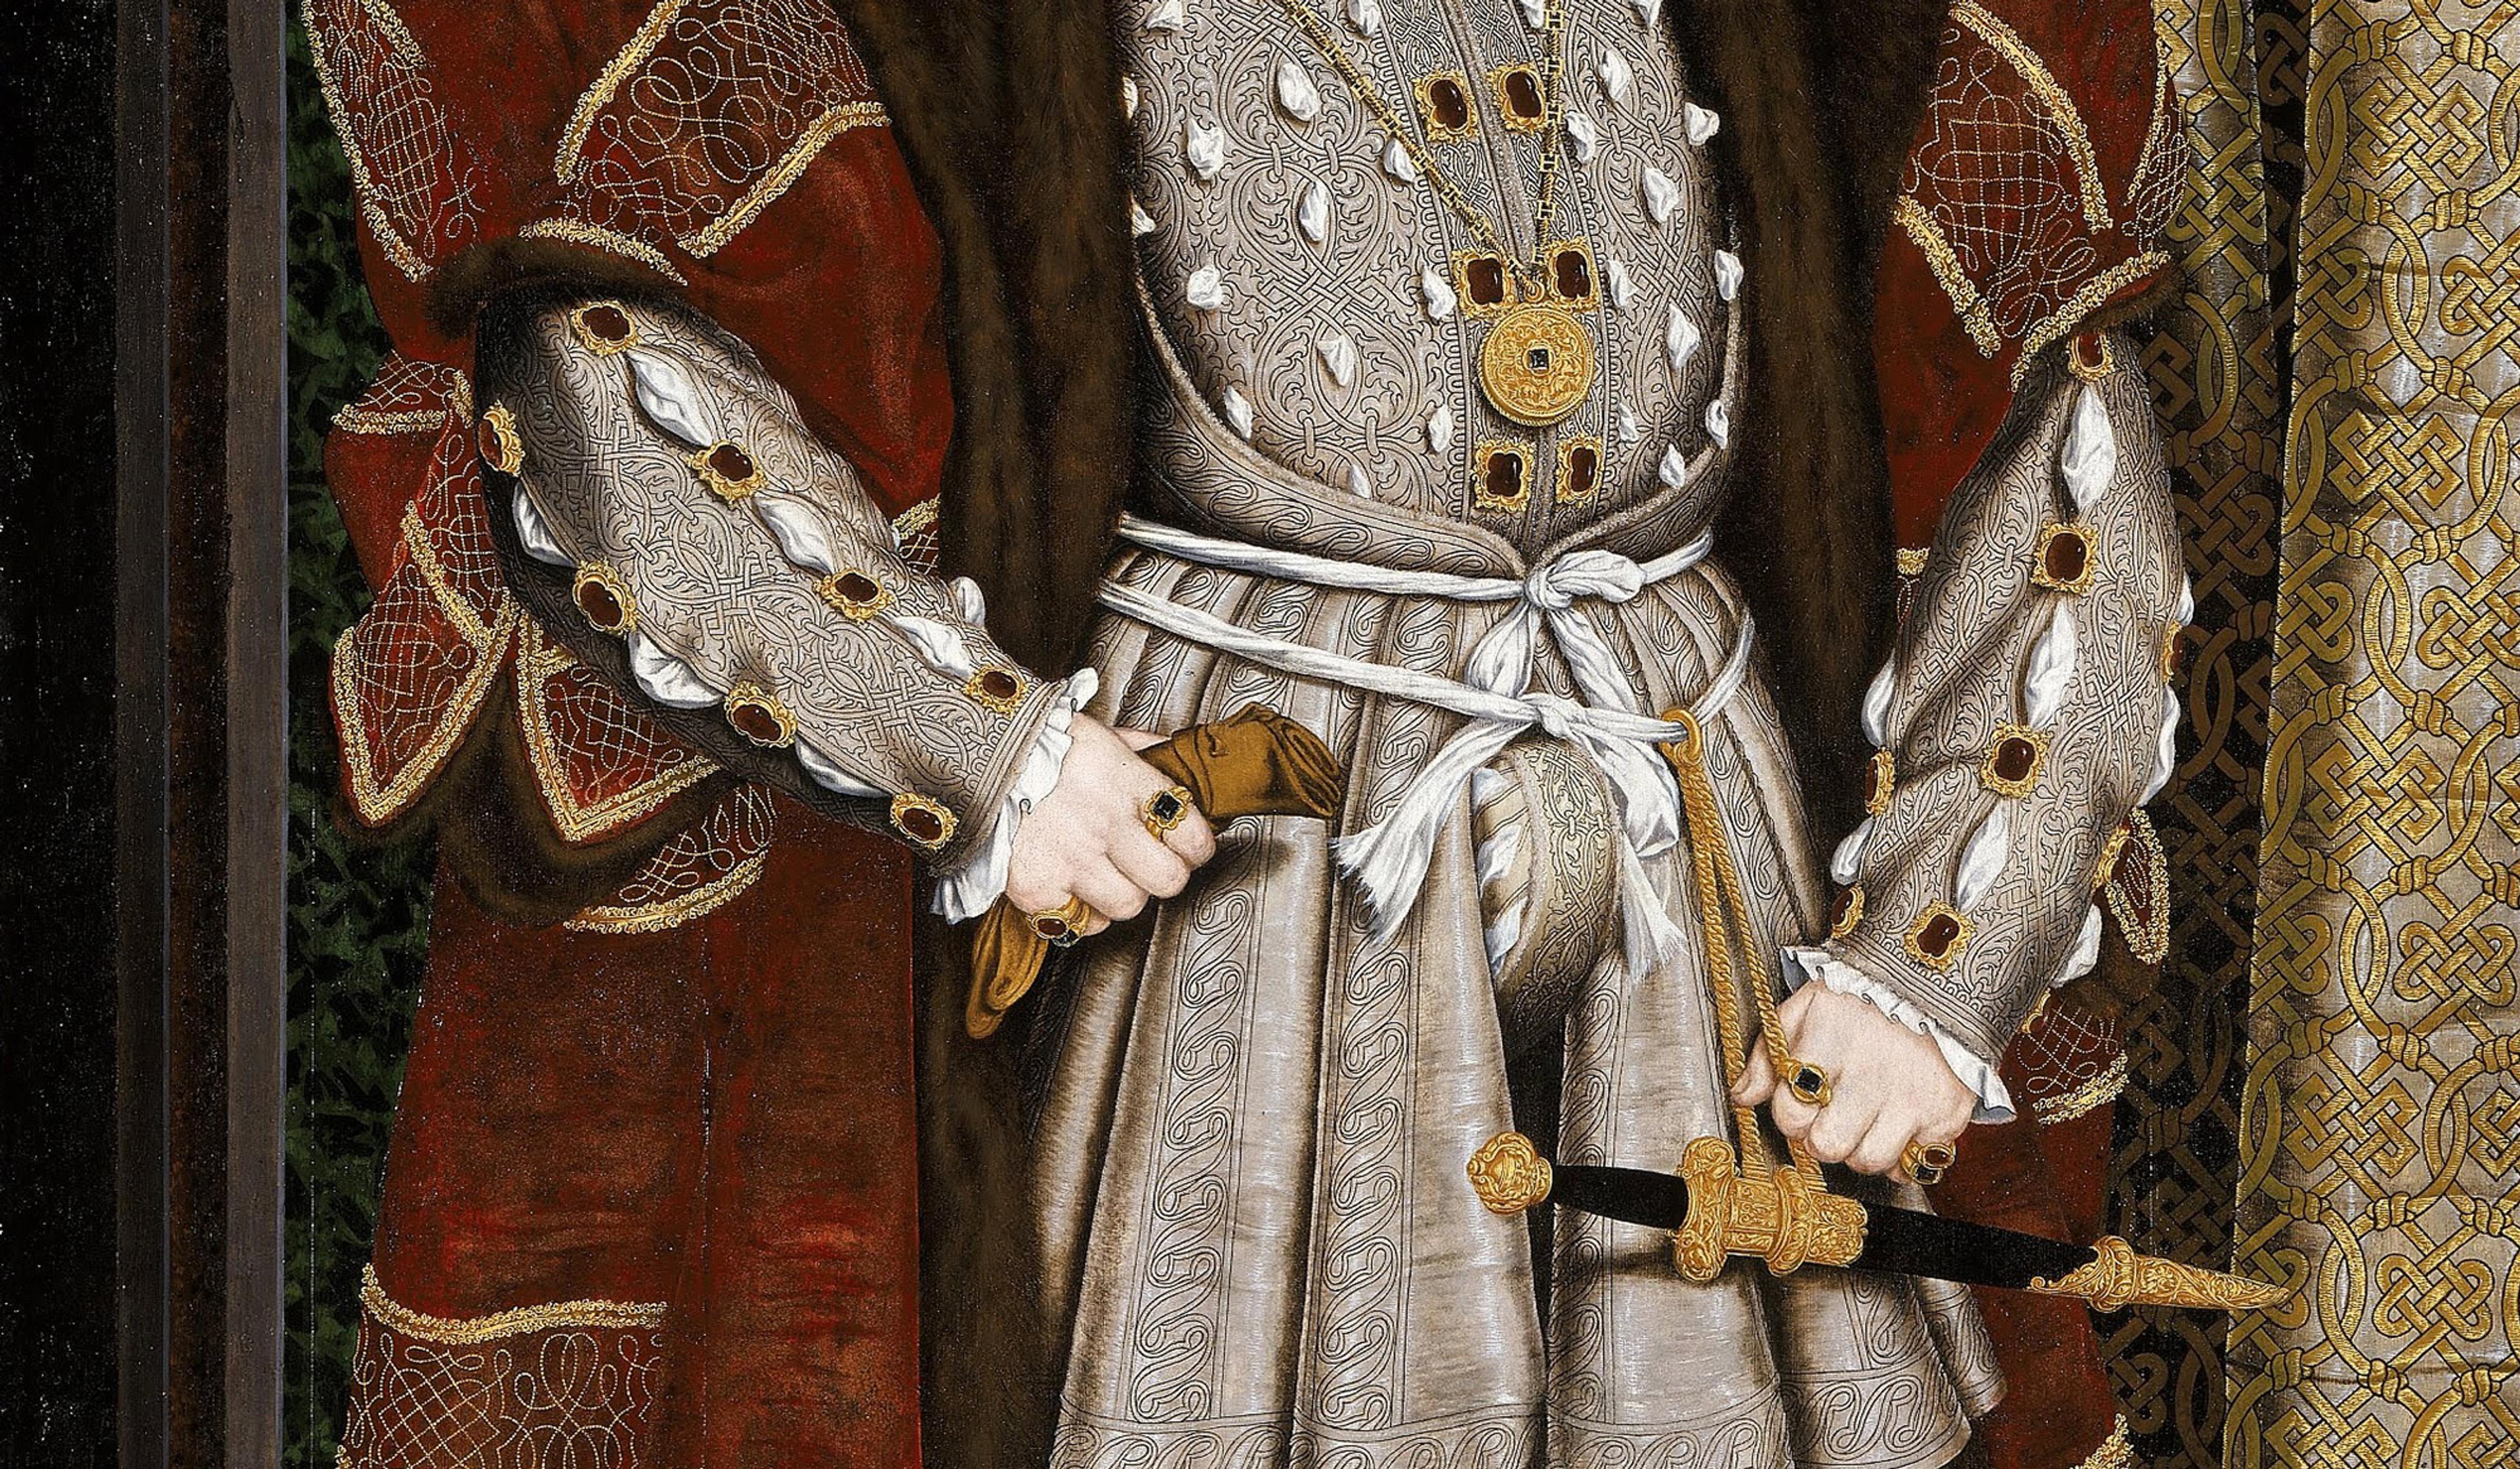 A rich Tudor-era outfit with elaborate brocade, fur trimming and jewellery, featuring ornate sleeves, a belt, and a robe with intricate patterns.